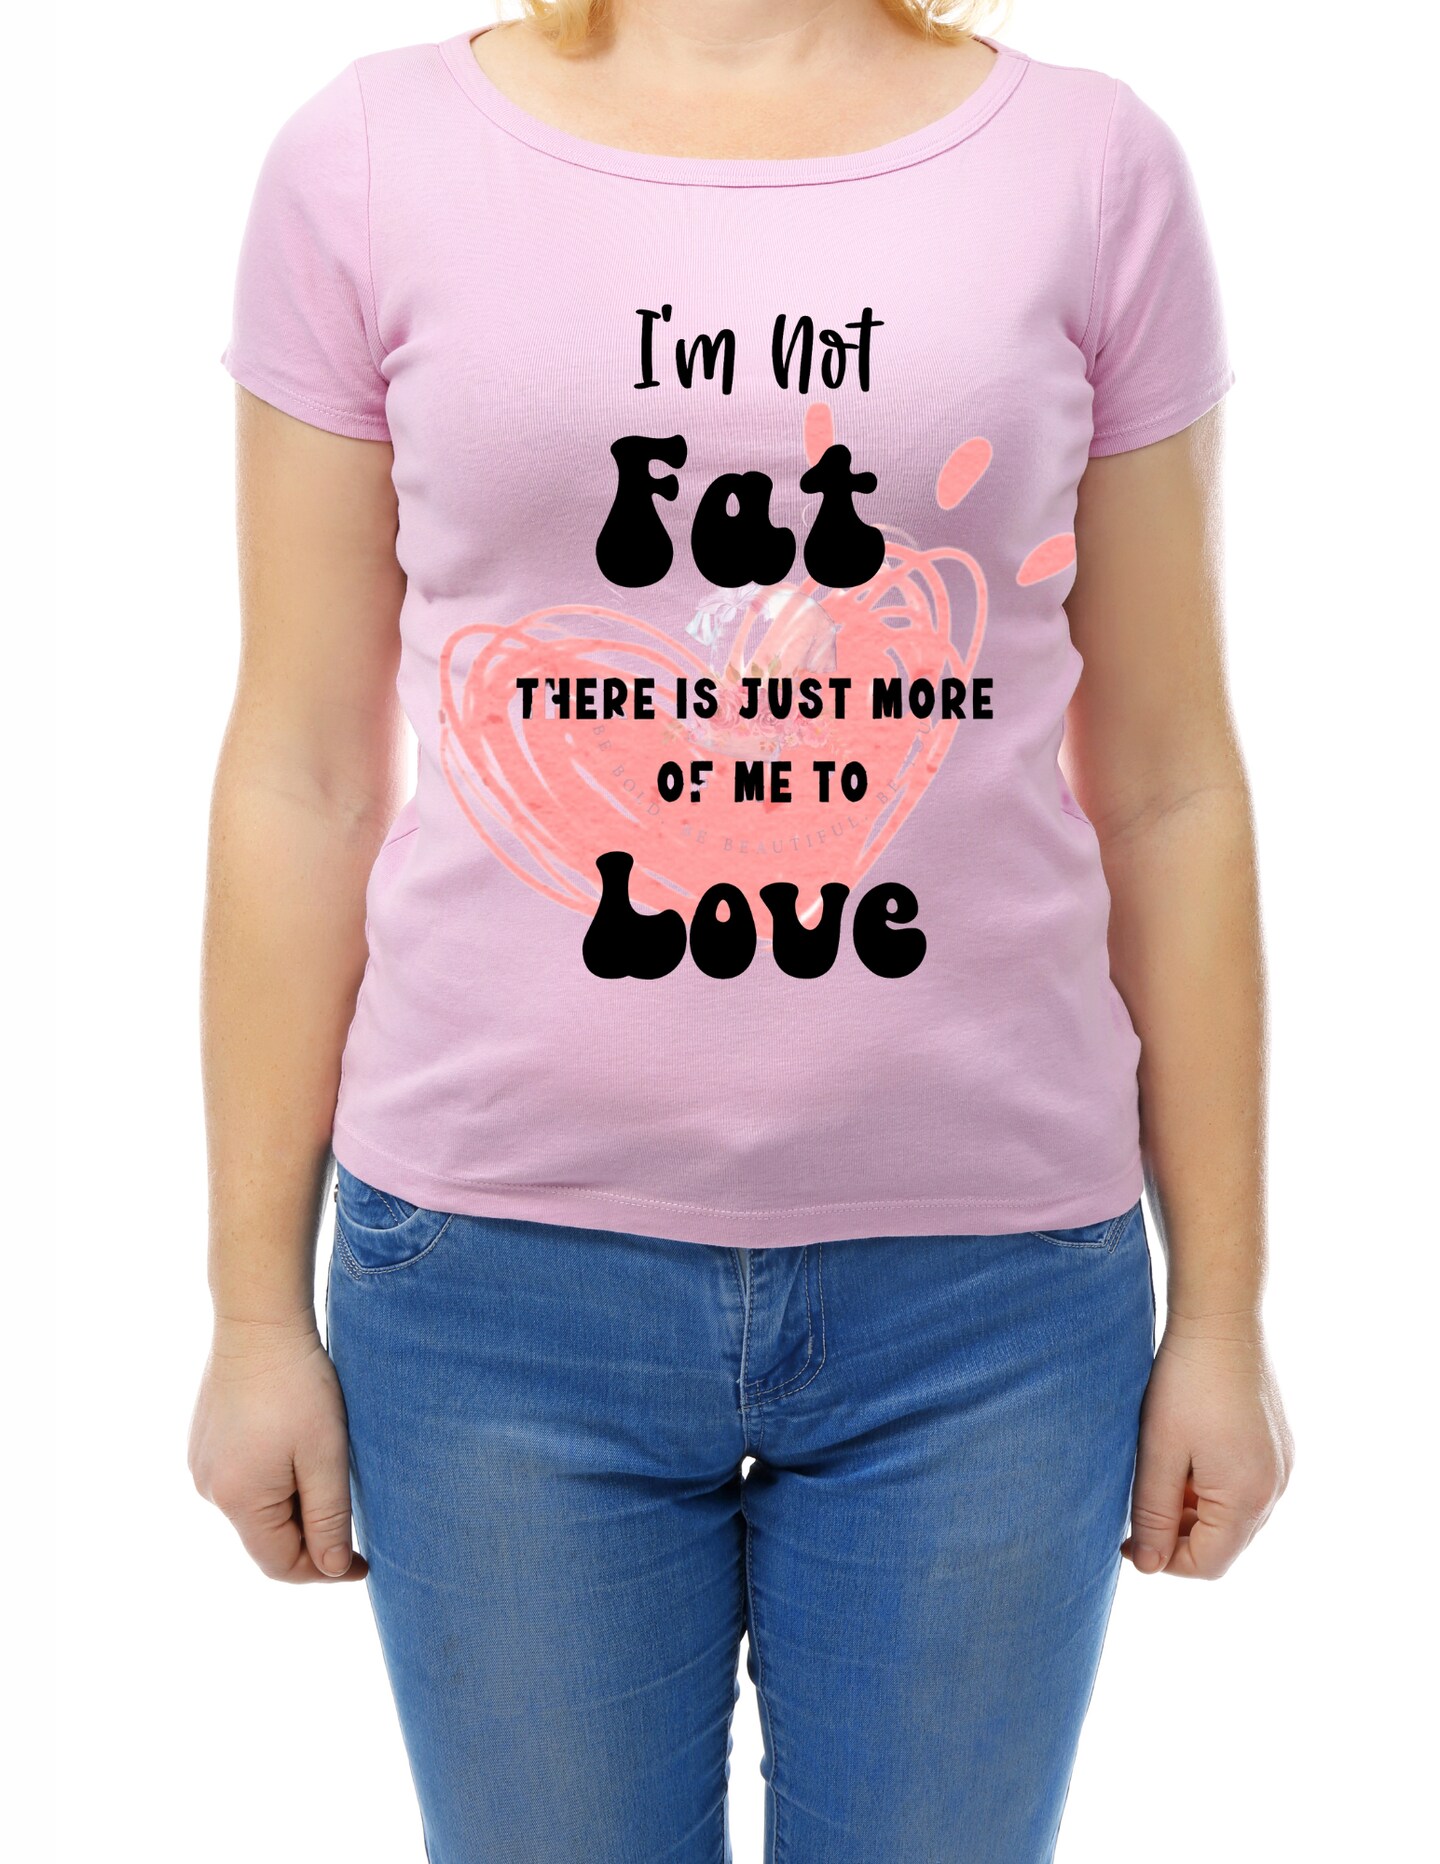 I'm not fat there is more of me to love t-shirt